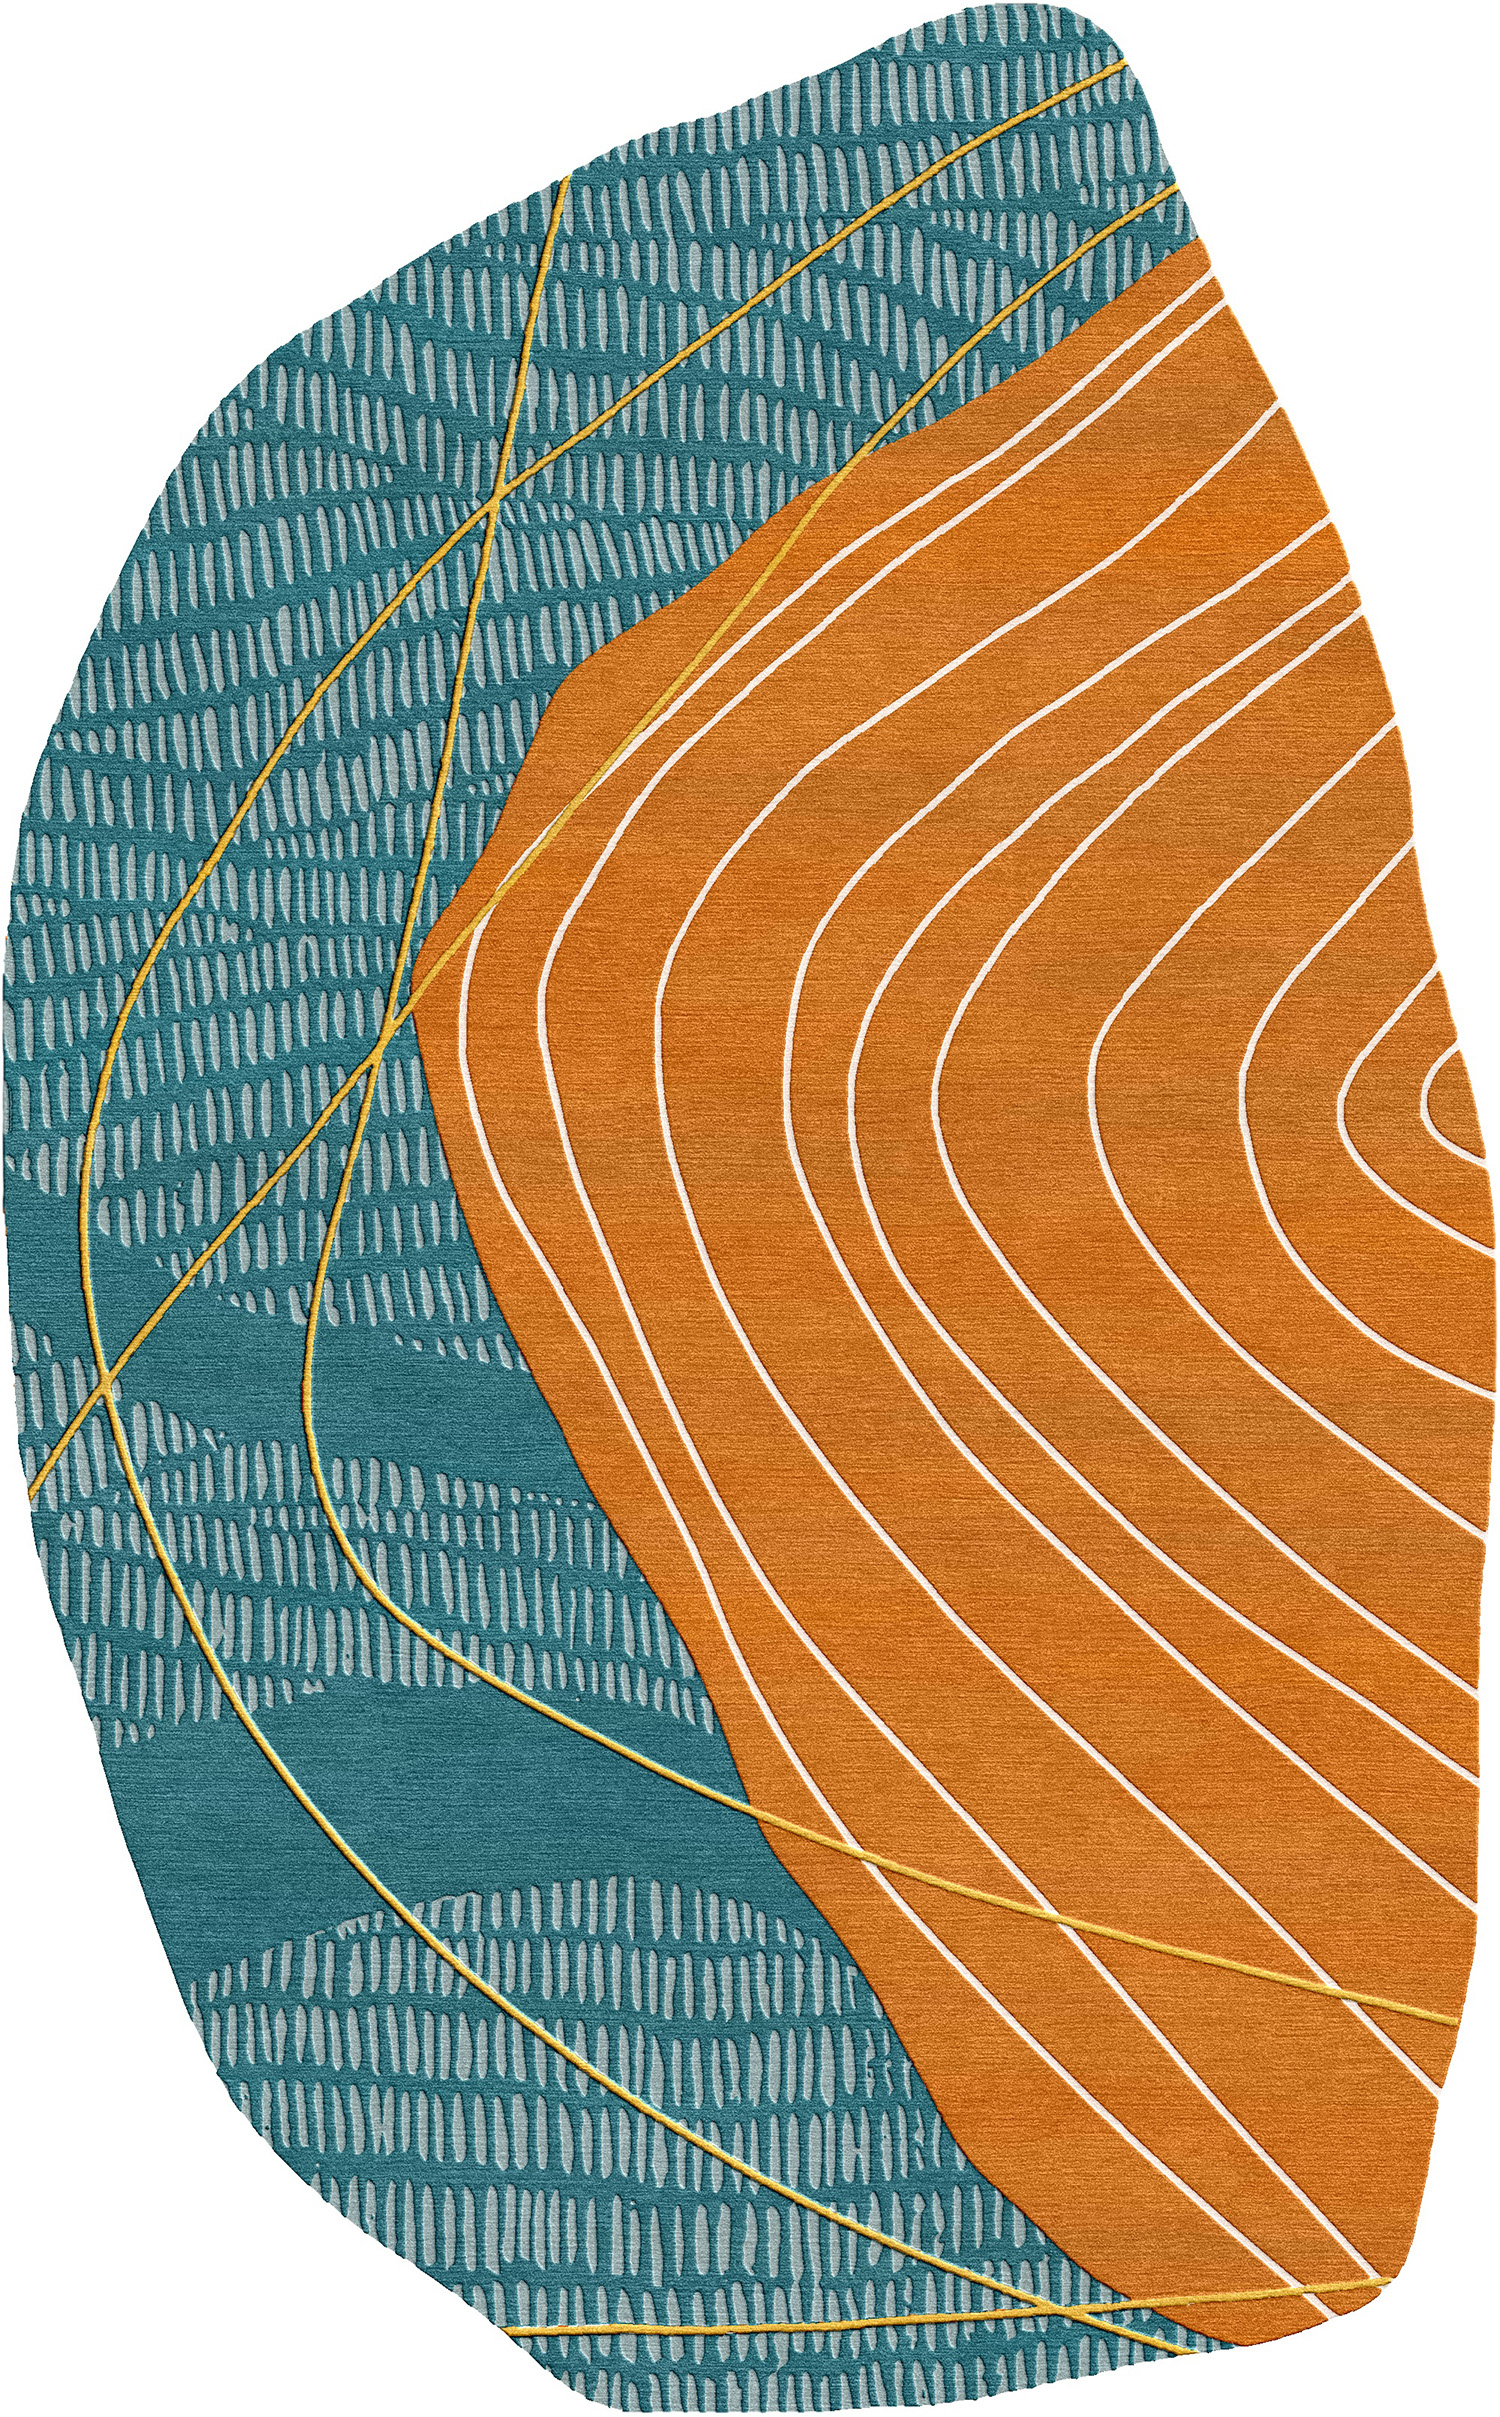 Formations VII Odd Shaped Area Rug Product Image